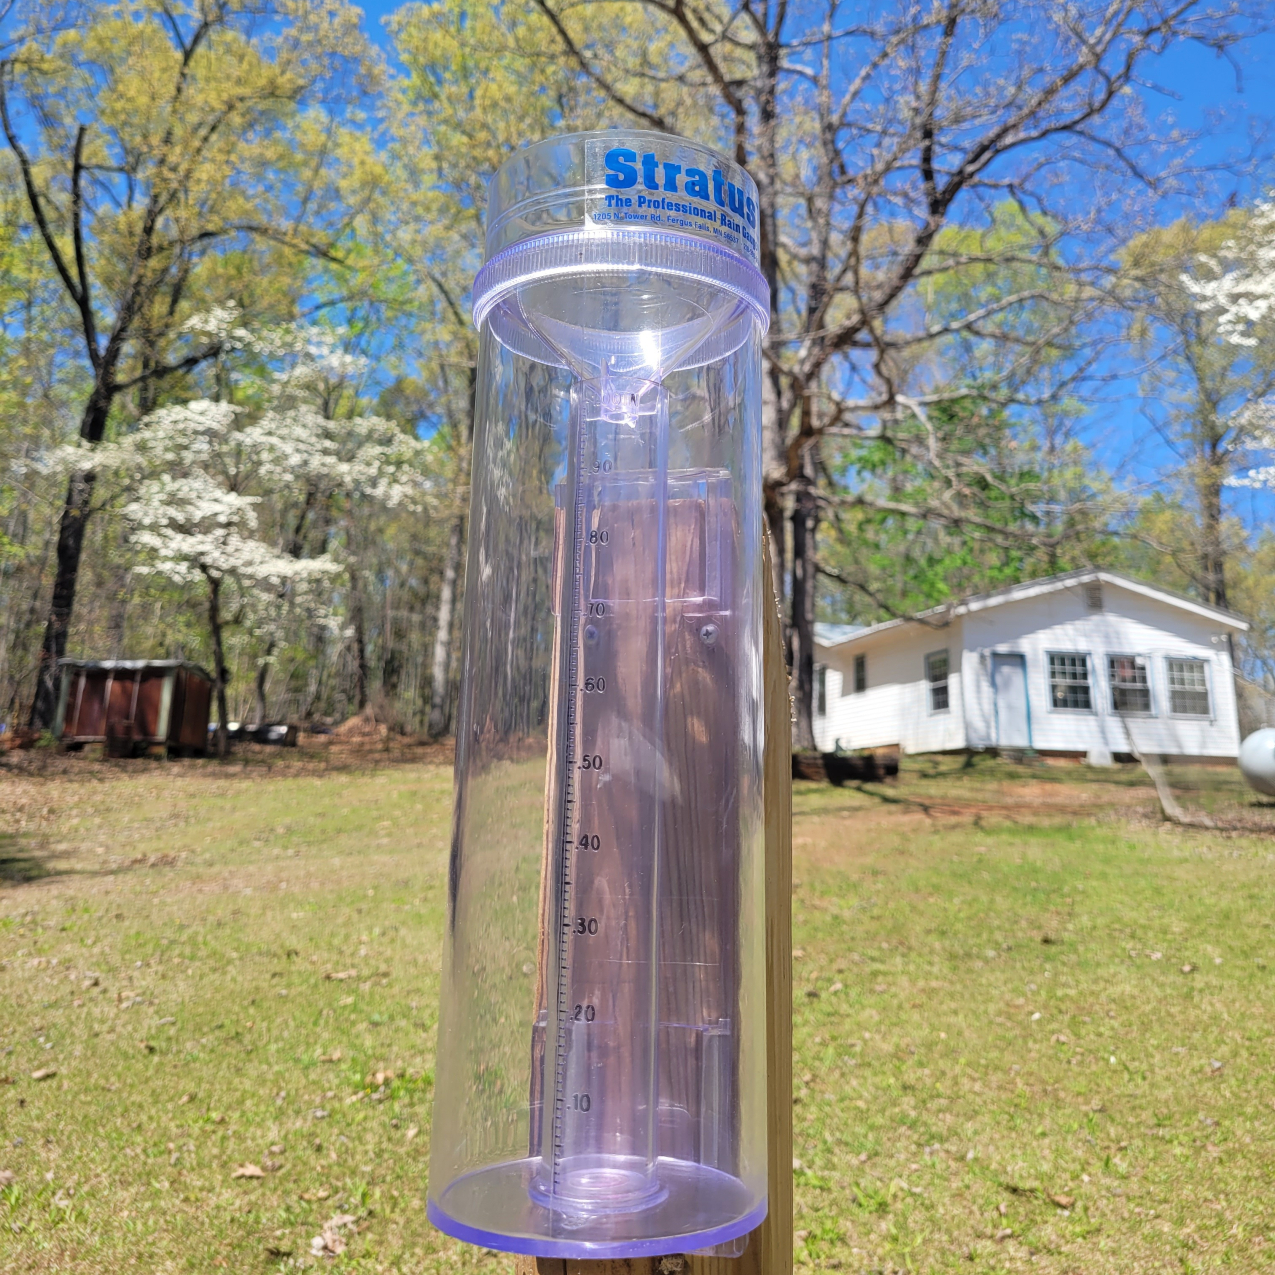 A wide clear plastic tube, sitting in front of a white house with lush grass in the background, basking in sunlight, with no water collected in the smaller measuring tube located within the middle of the large.